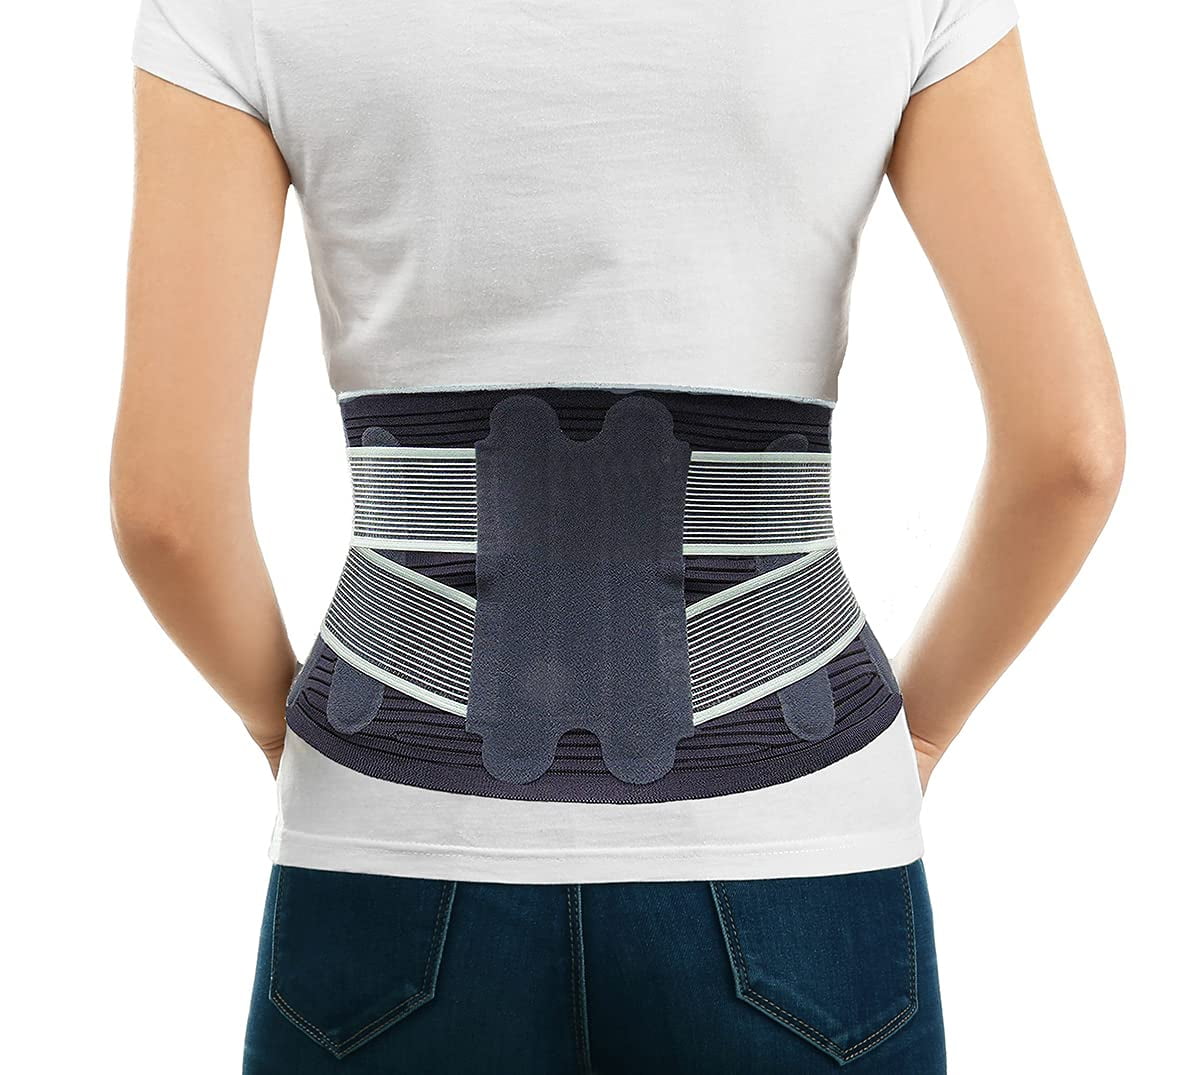 AllyFlex Sports Back Brace for Lifting Lower Back Support for Work Y-Shape Suspenders Safety Belt with Dual 3D Lumbar Support Relieve Pain, Prevent